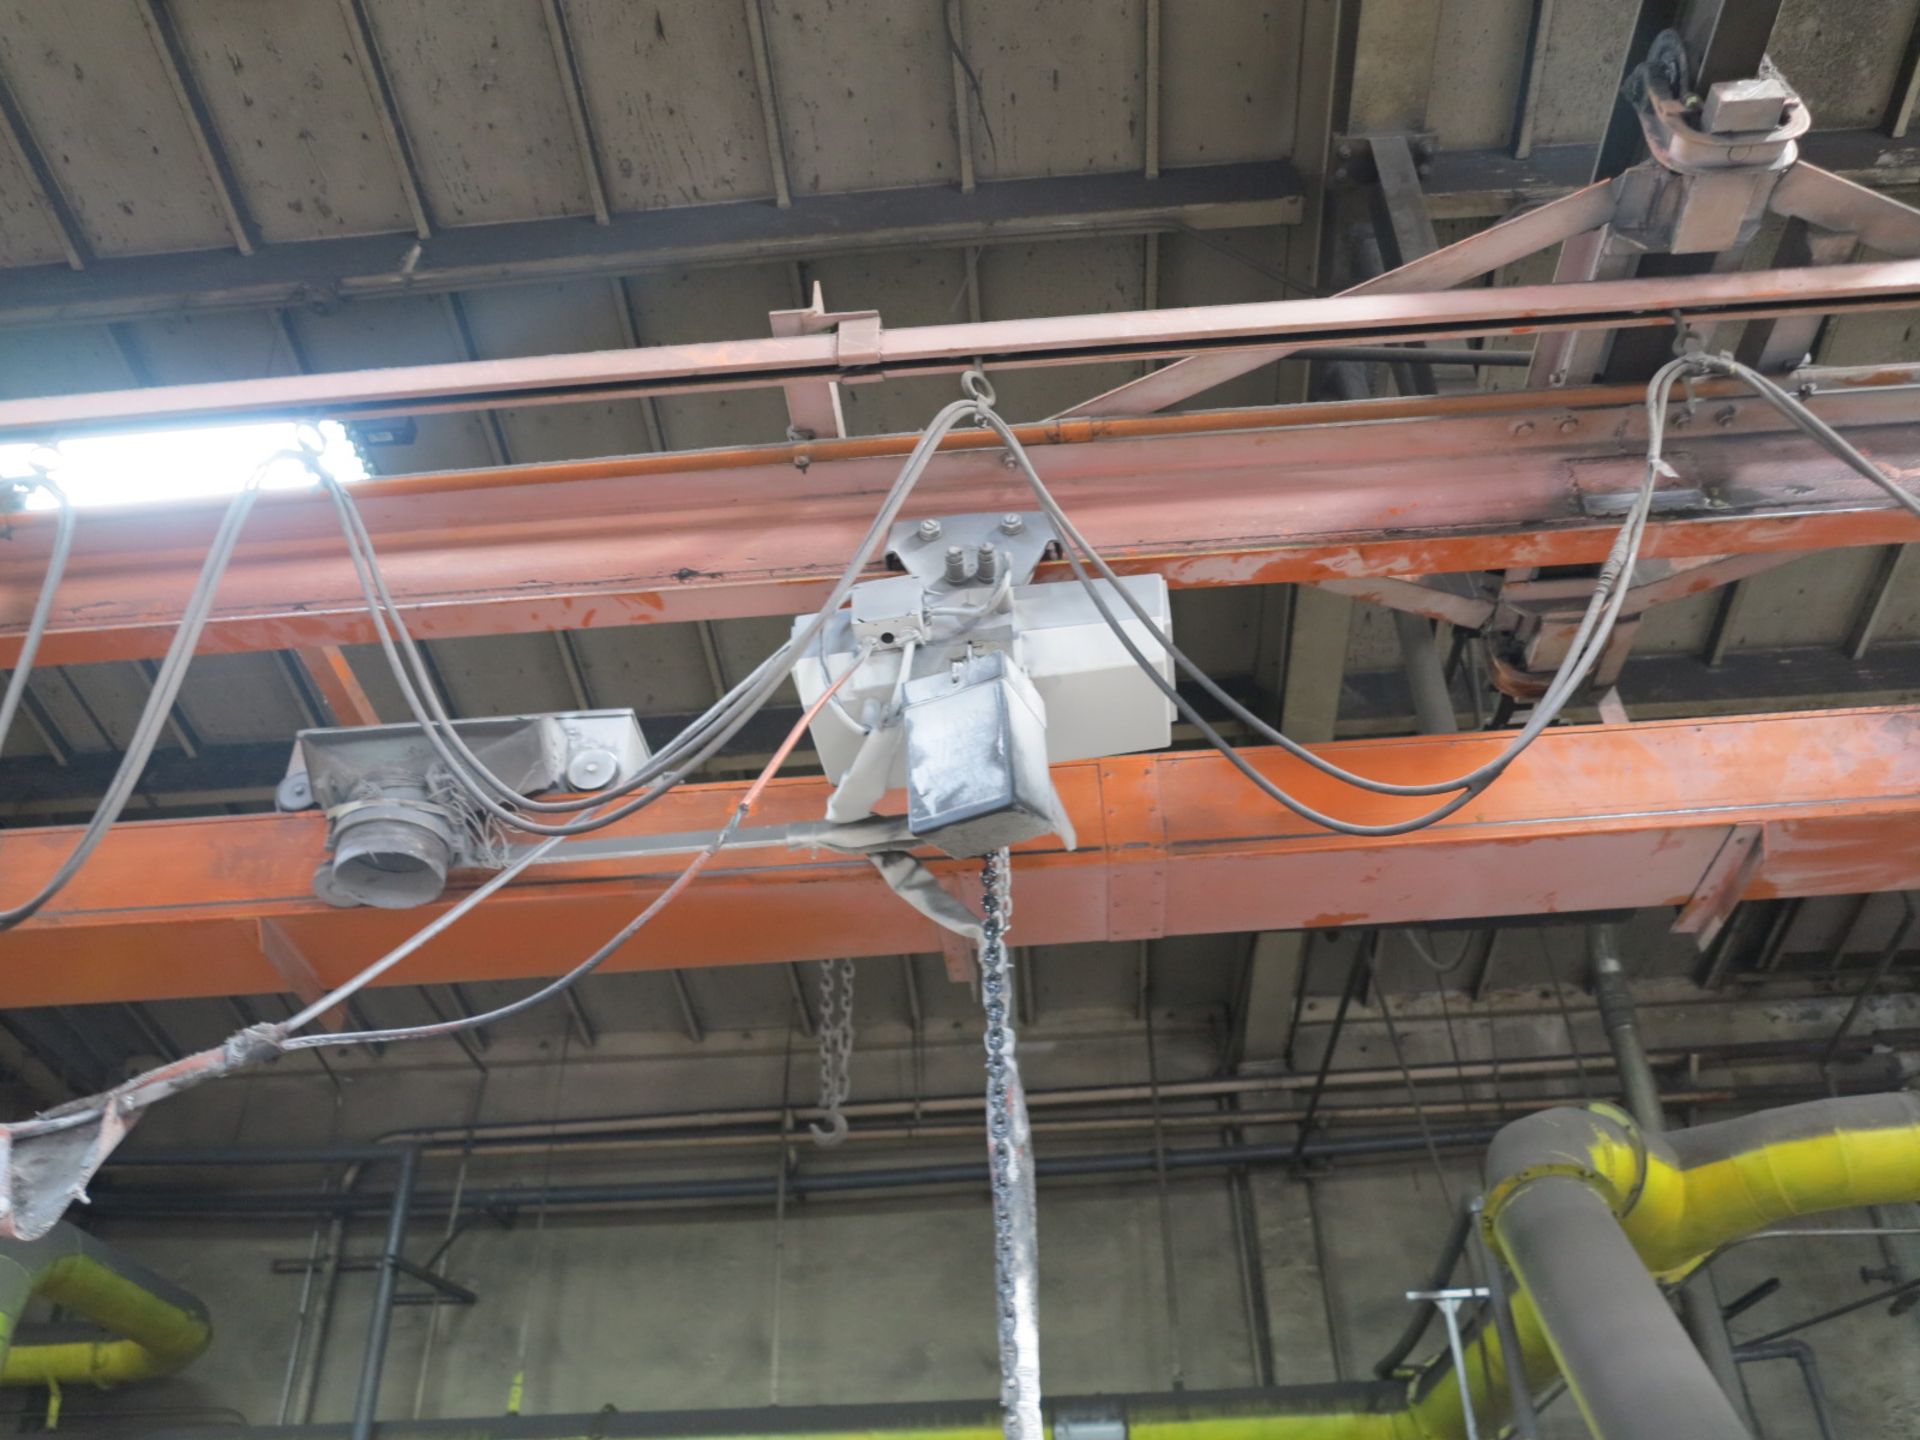 OVERHEAD CRANE SYSTEM W/ DUST COLLECTION/EXHAUST SYSTEM, APPROX. 120' SPAN, TRAVELS APPROX. 45'